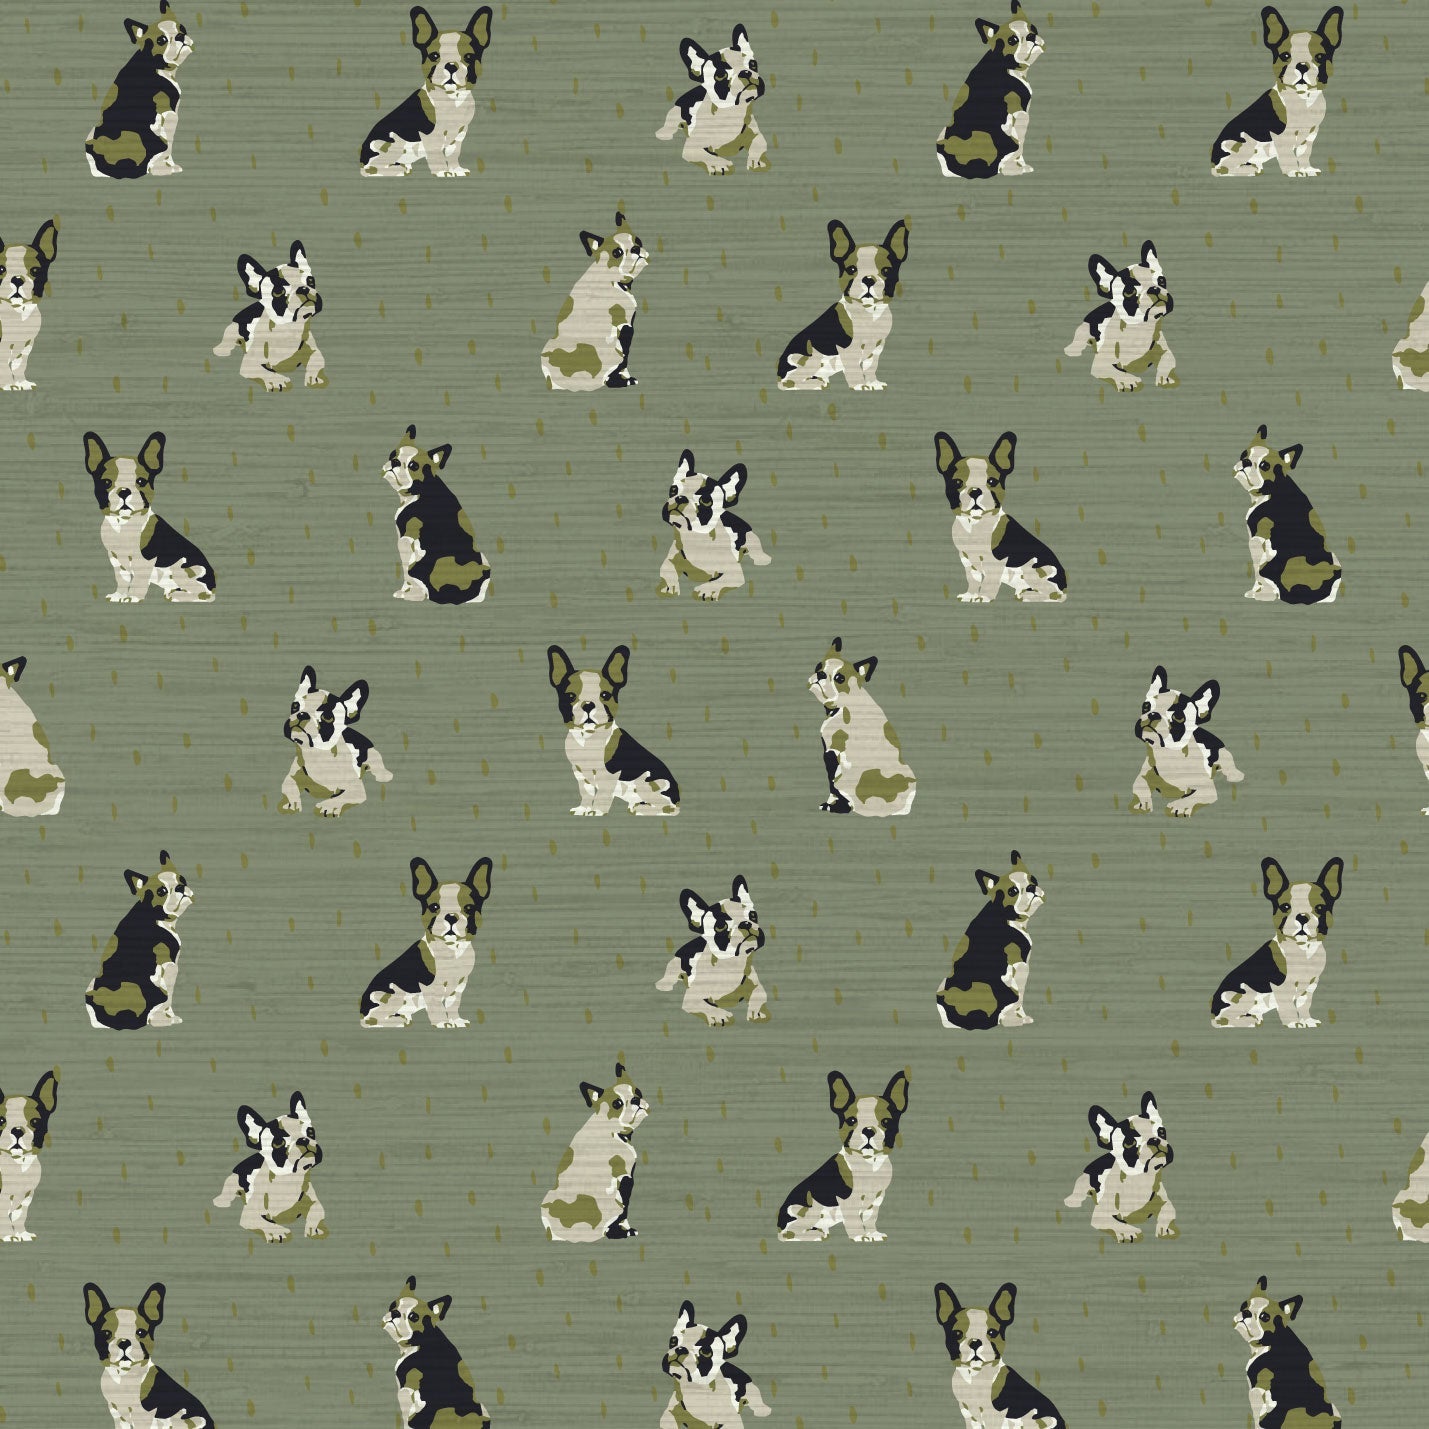 Grasscloth wallpaper Natural Textured Eco-Friendly Non-toxic High-quality  Sustainable Interior Design Bold Custom Tailor-made Retro chic Grandmillennial Maximalism  Traditional Dopamine decor dog animal french bulldog pouch hound kid kids playroom nursery mudroomRustic Cabin cottage Luxury Contemporary stripe olive green